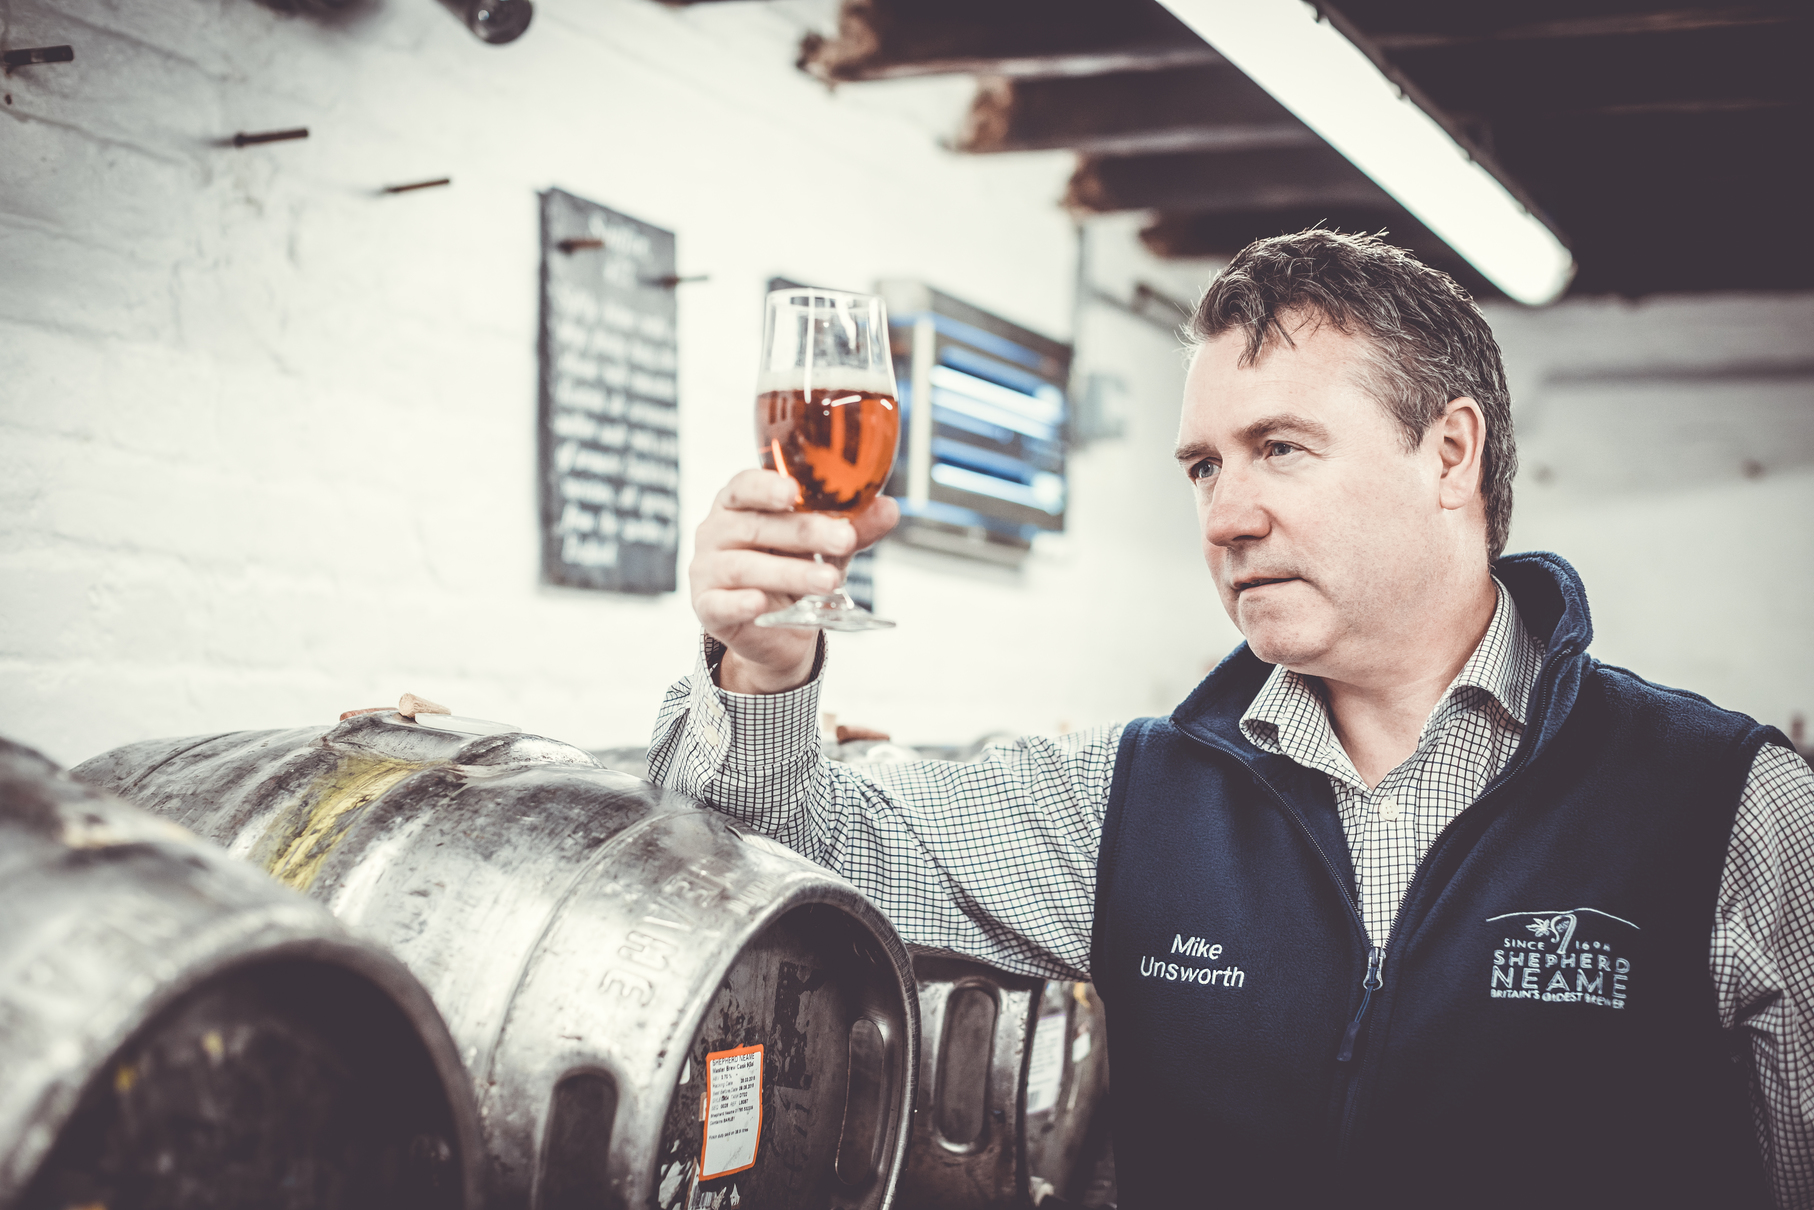 Shepherd Neame's head brewer Mike Unsworth